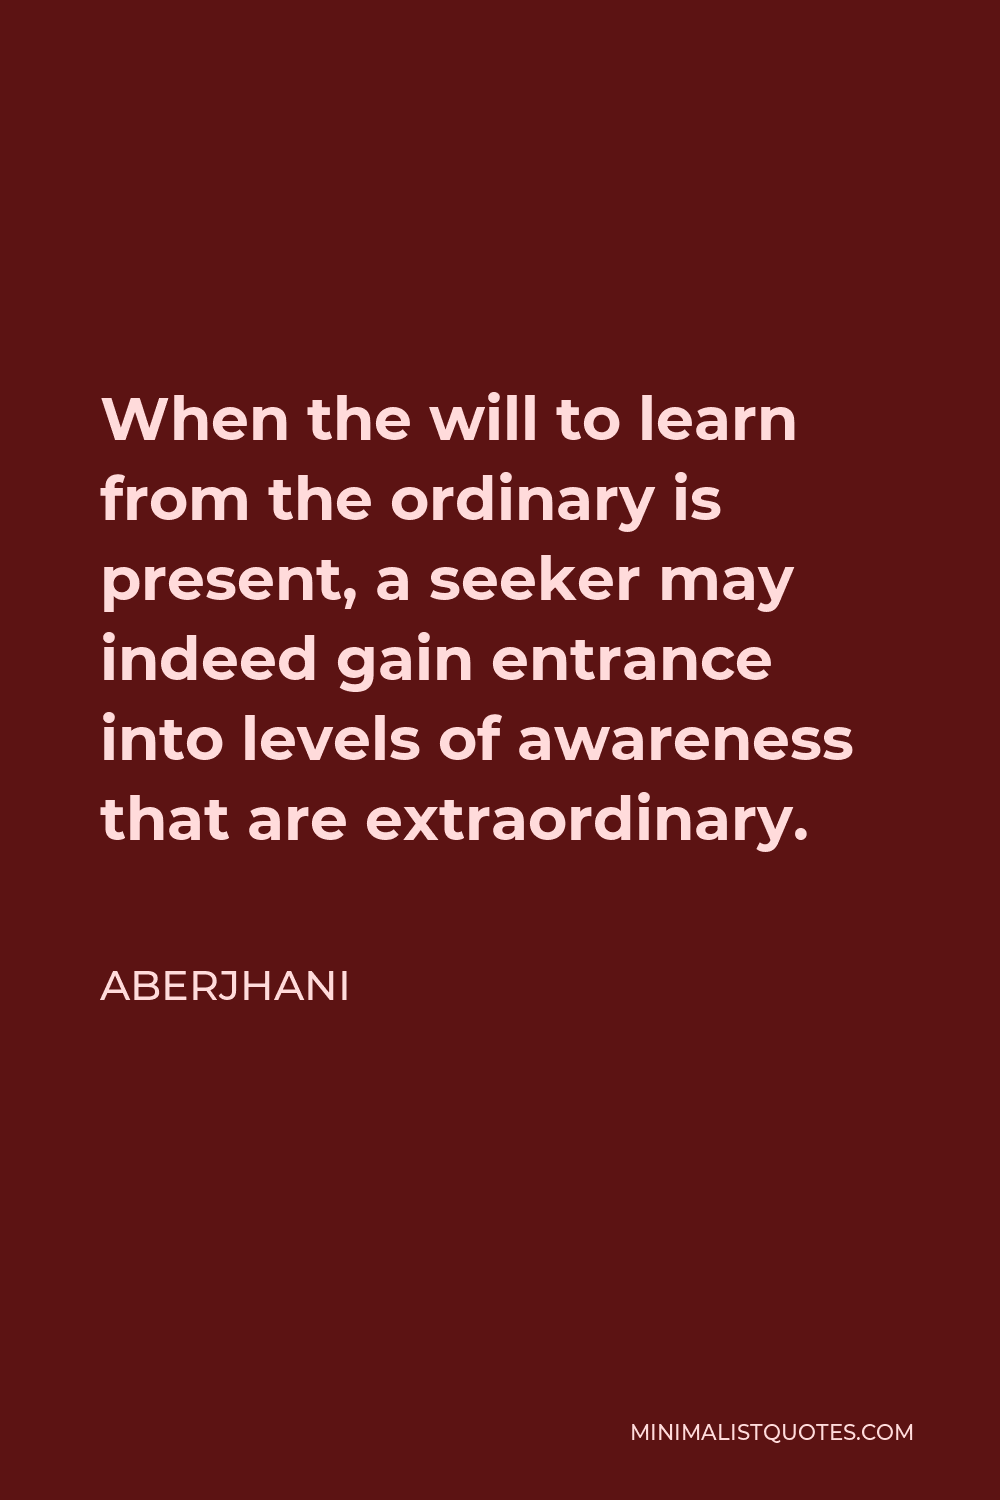 Aberjhani Quote - When the will to learn from the ordinary is present, a seeker may indeed gain entrance into levels of awareness that are extraordinary.